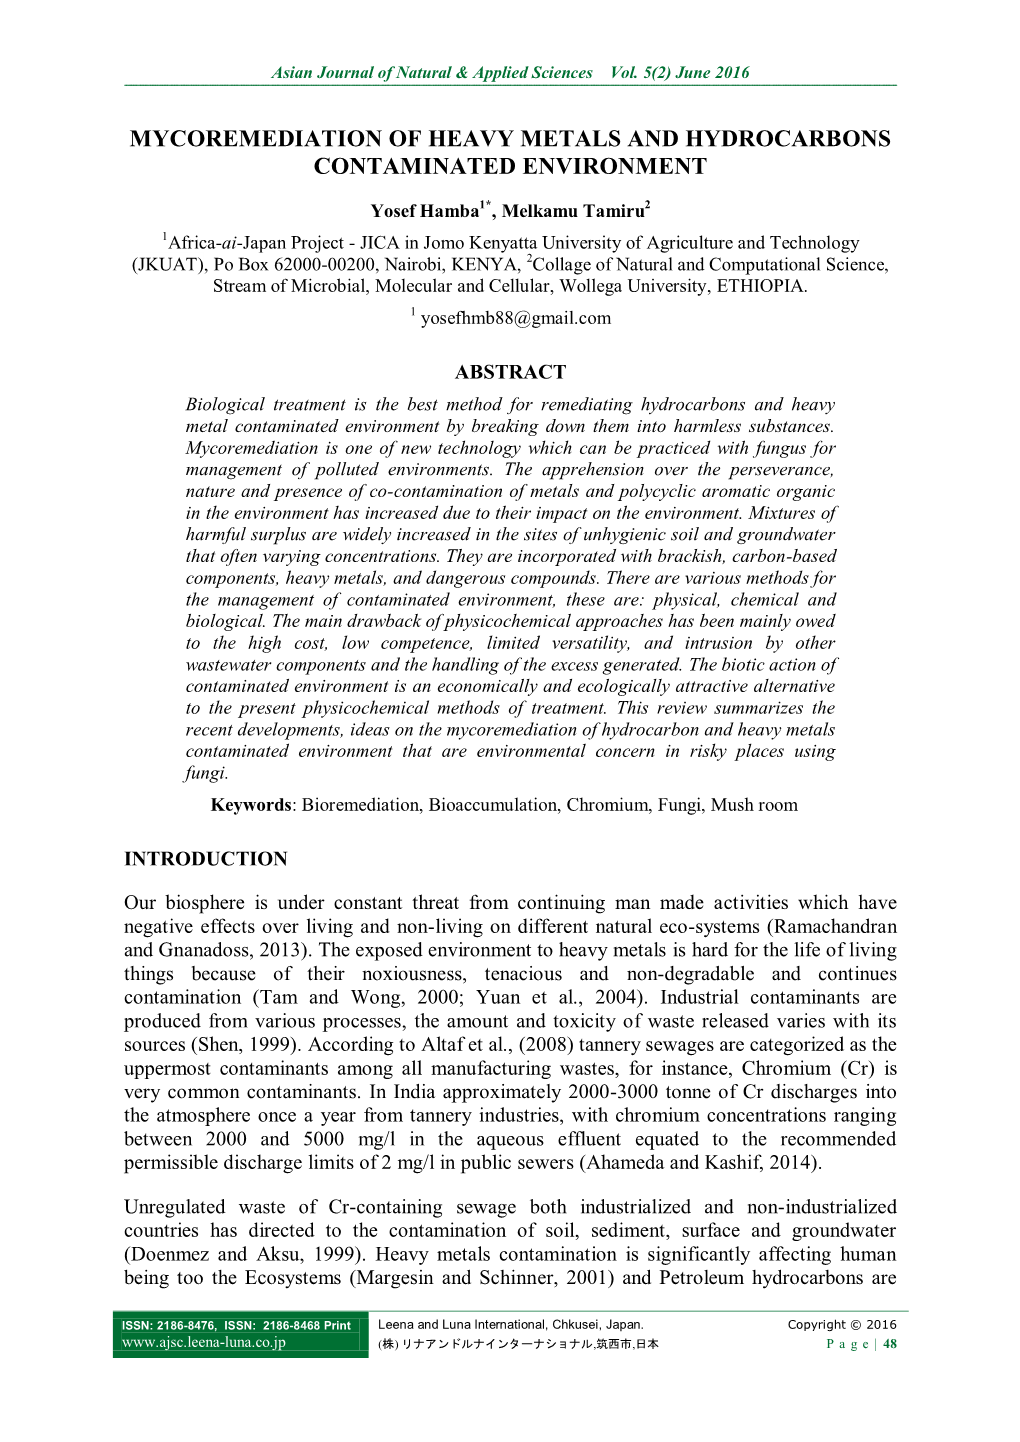 Mycoremediation of Heavy Metals and Hydrocarbons Contaminated Environment